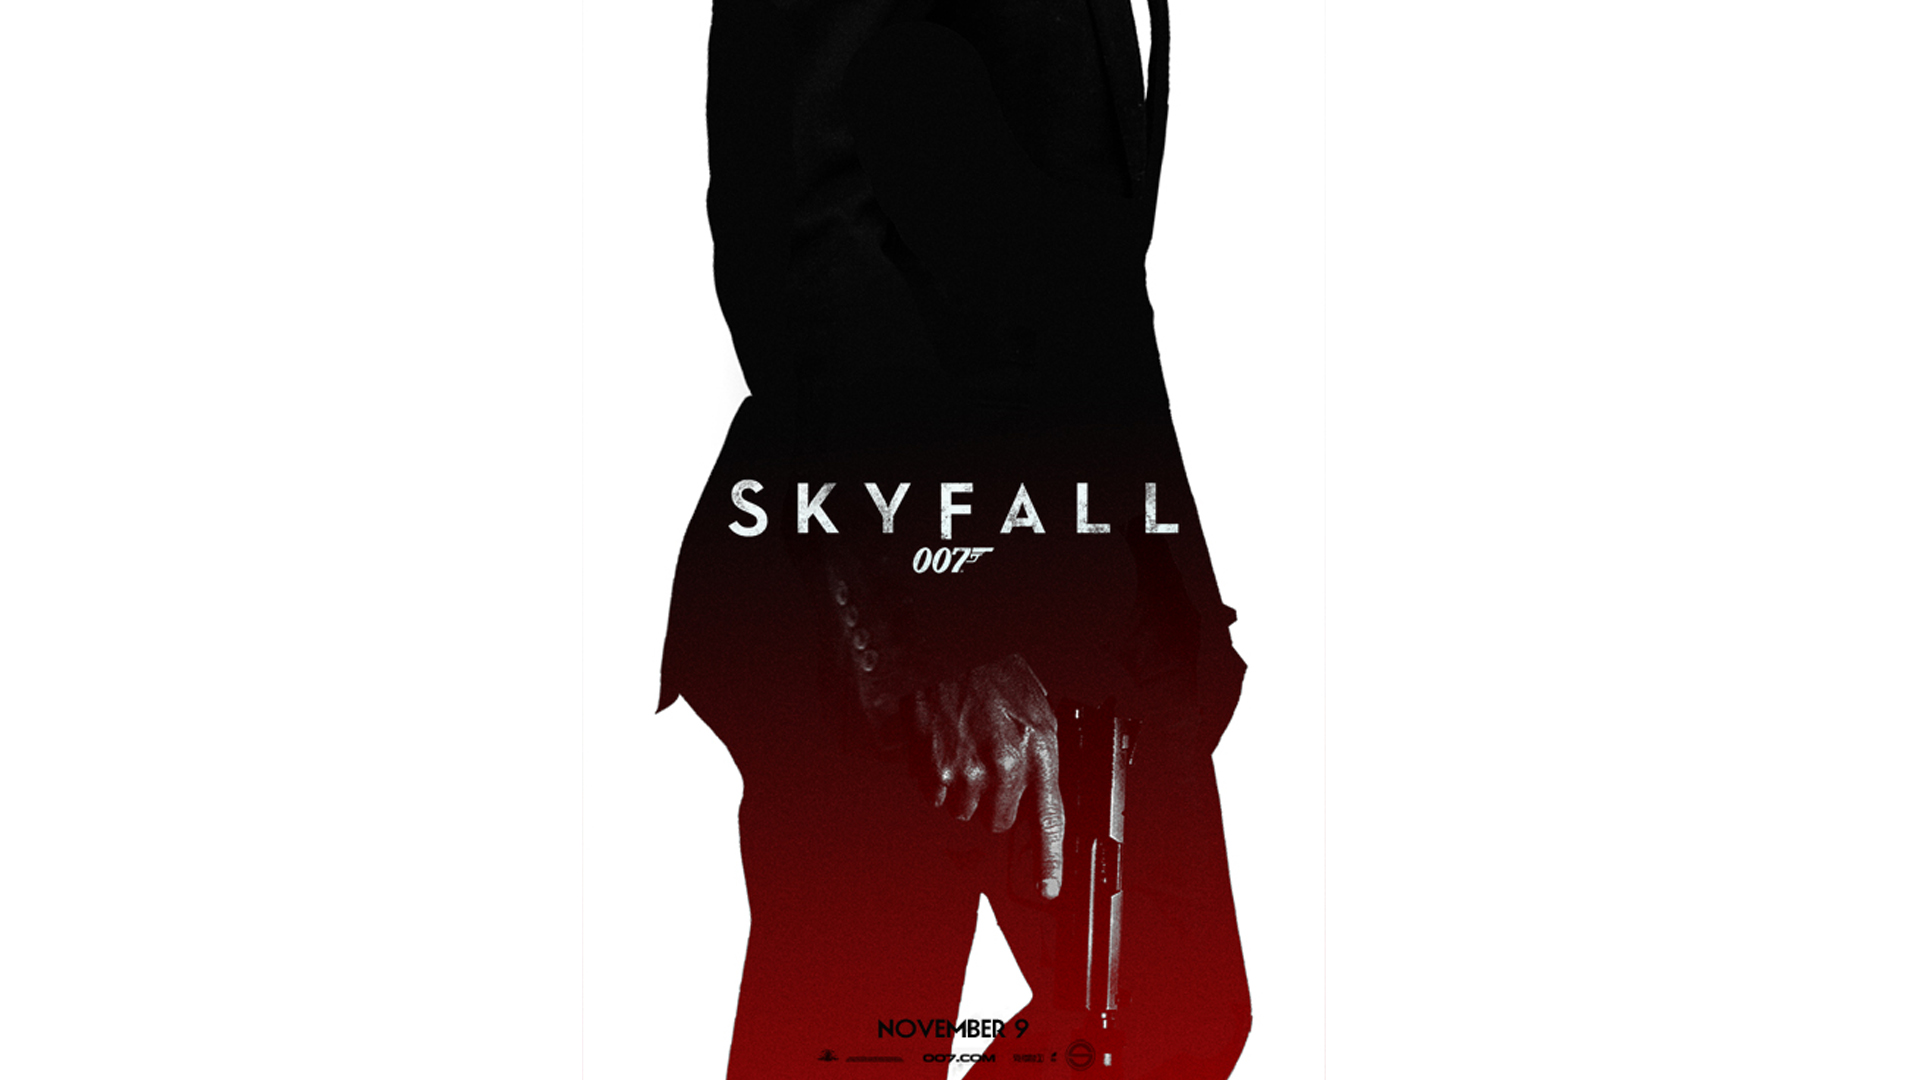 Bond Skyfall You Are Ing James Wallpaper